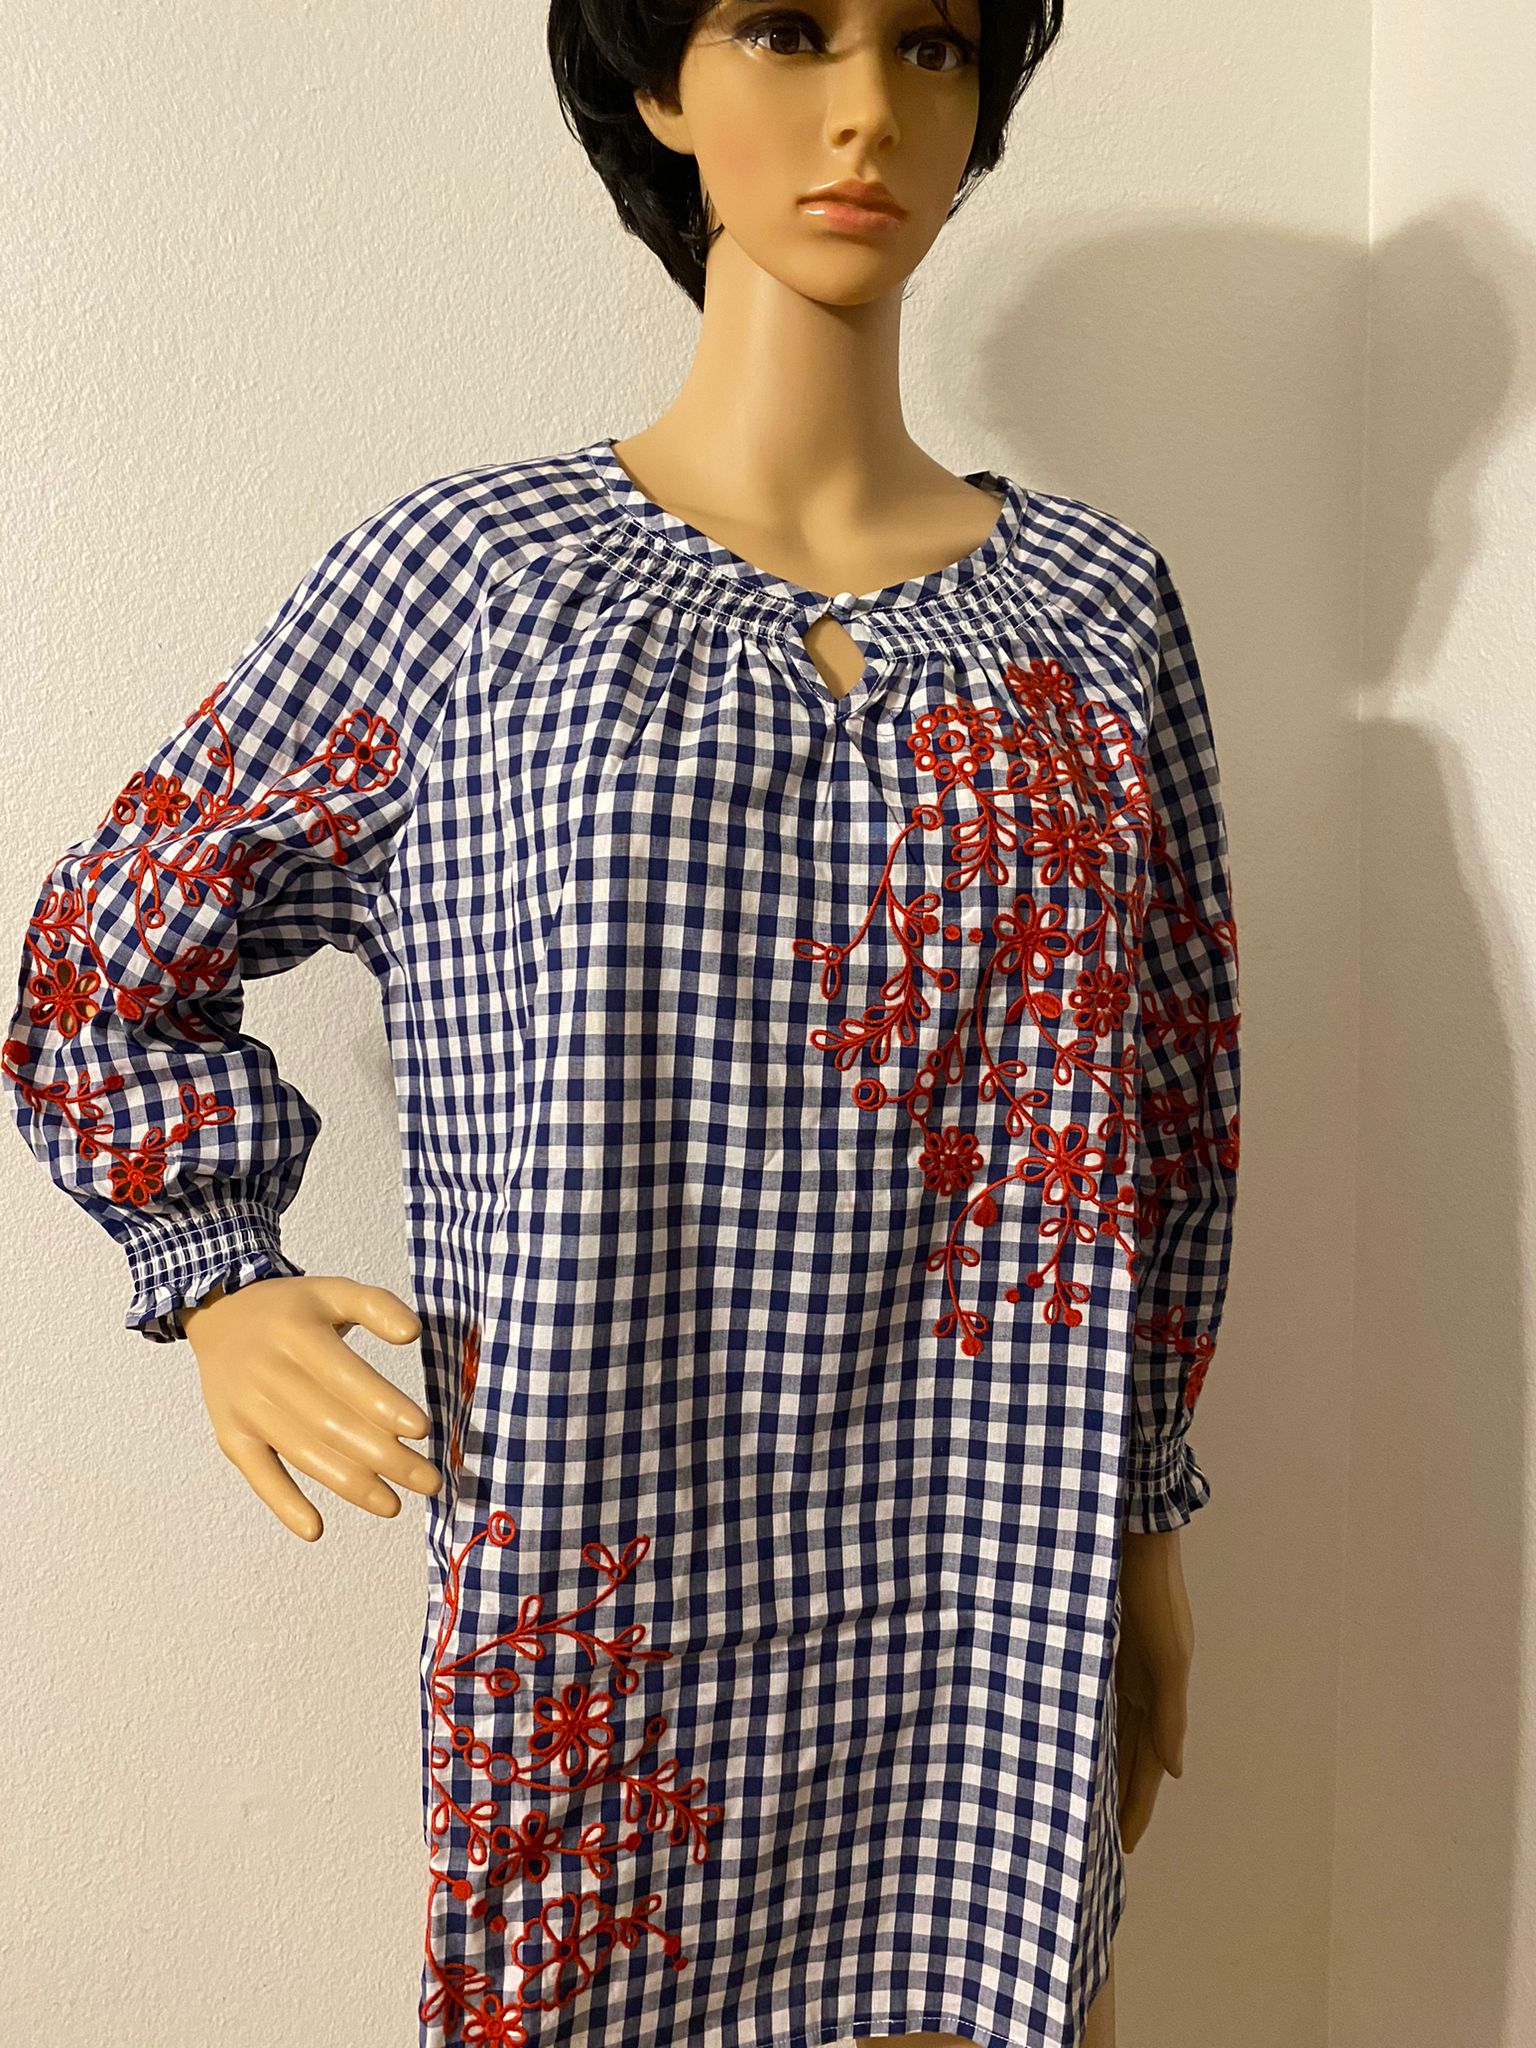 Isaac Mizrahi Live! Gingham Top with Embroidery